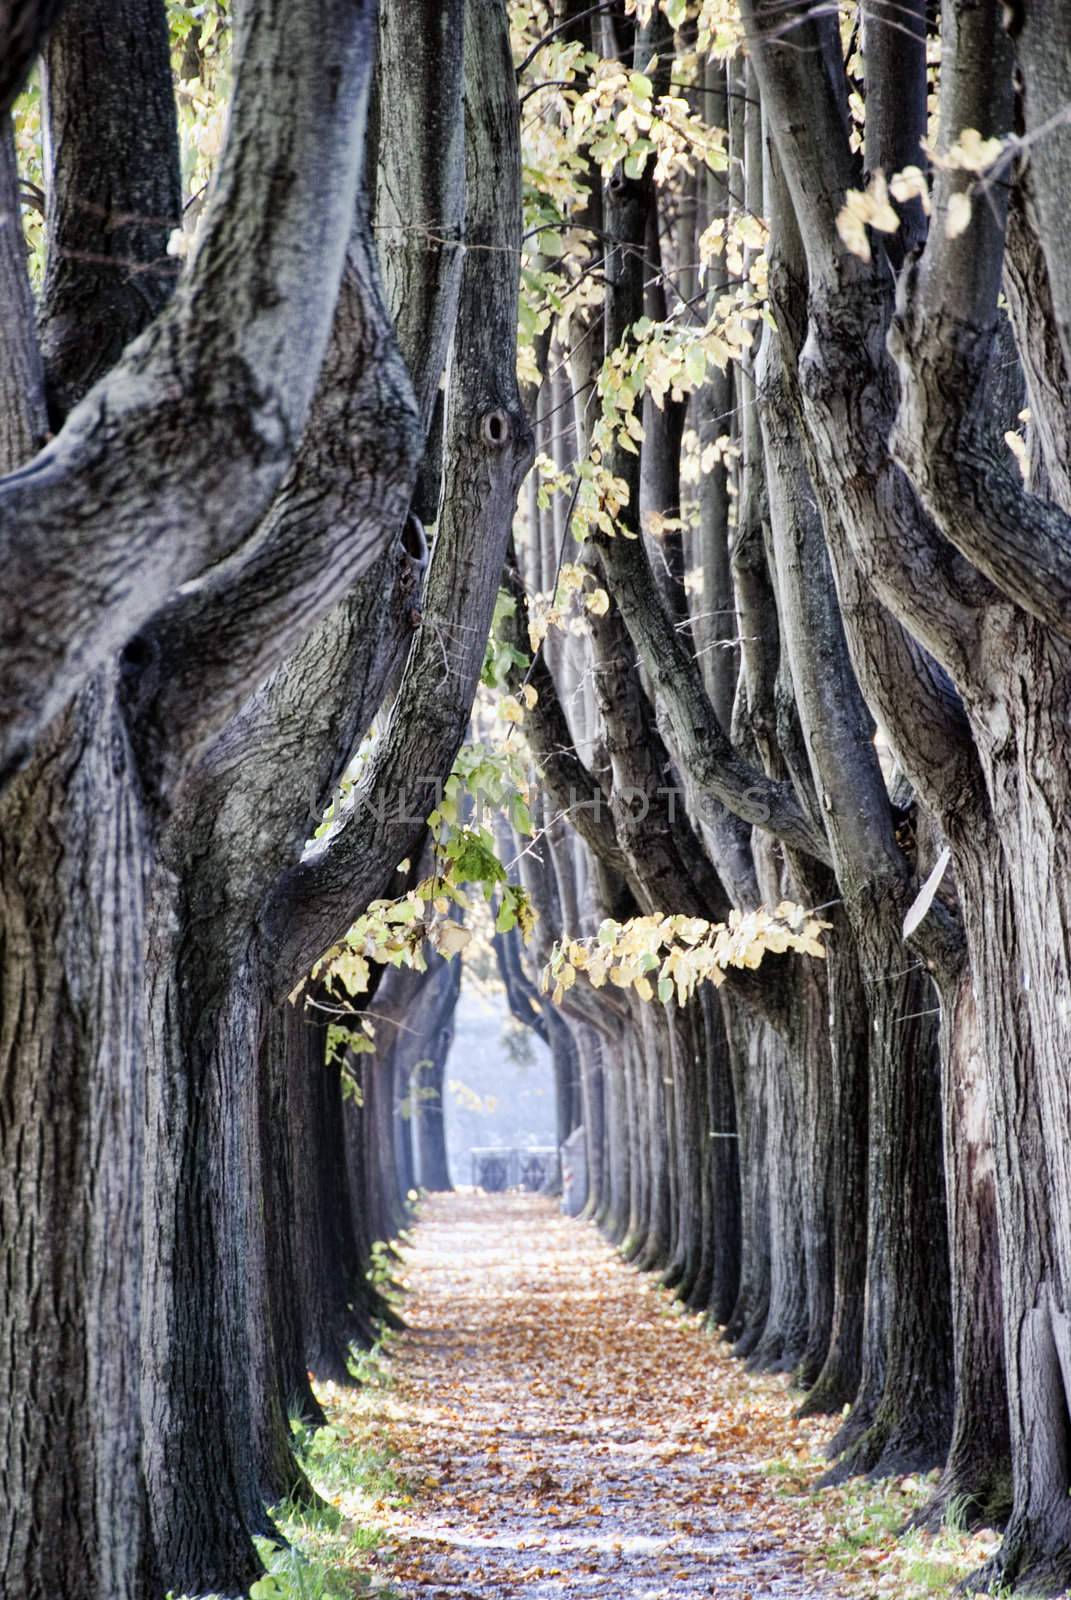 Tree Alley in Lucca, Italy by jovannig